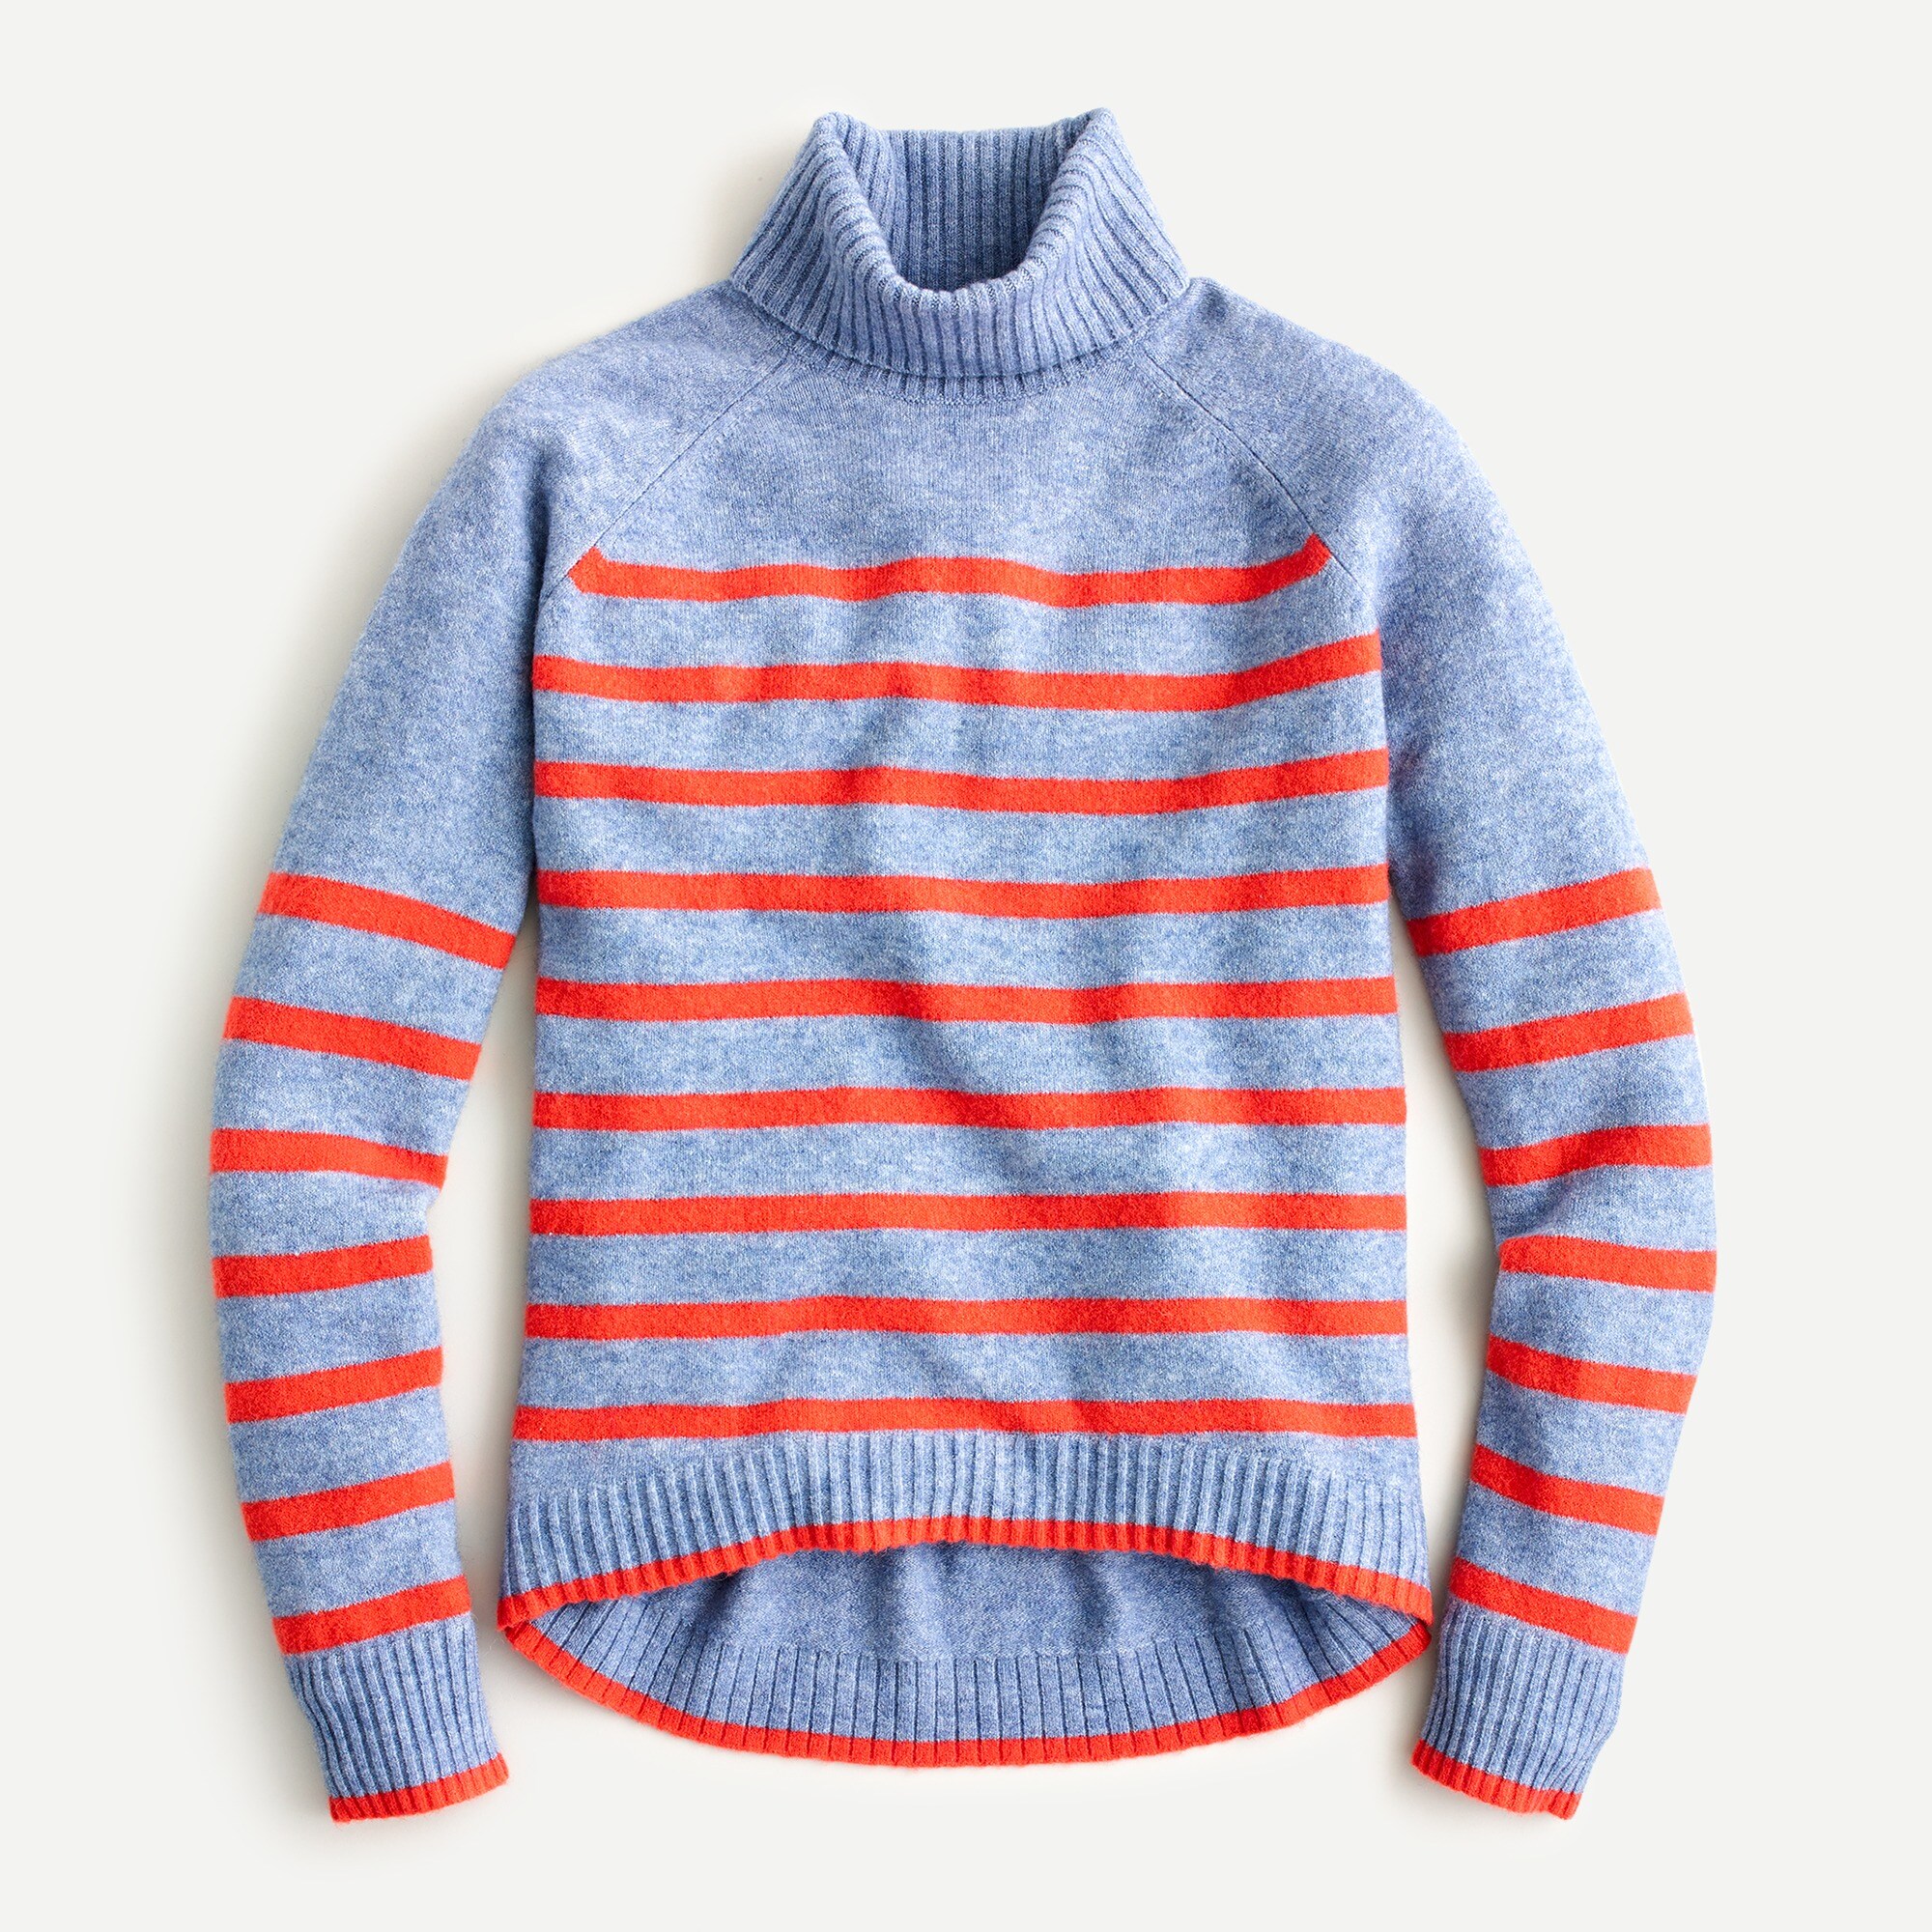 J.Crew: Tipped Turtleneck Sweater In Striped Supersoft Yarn For Women